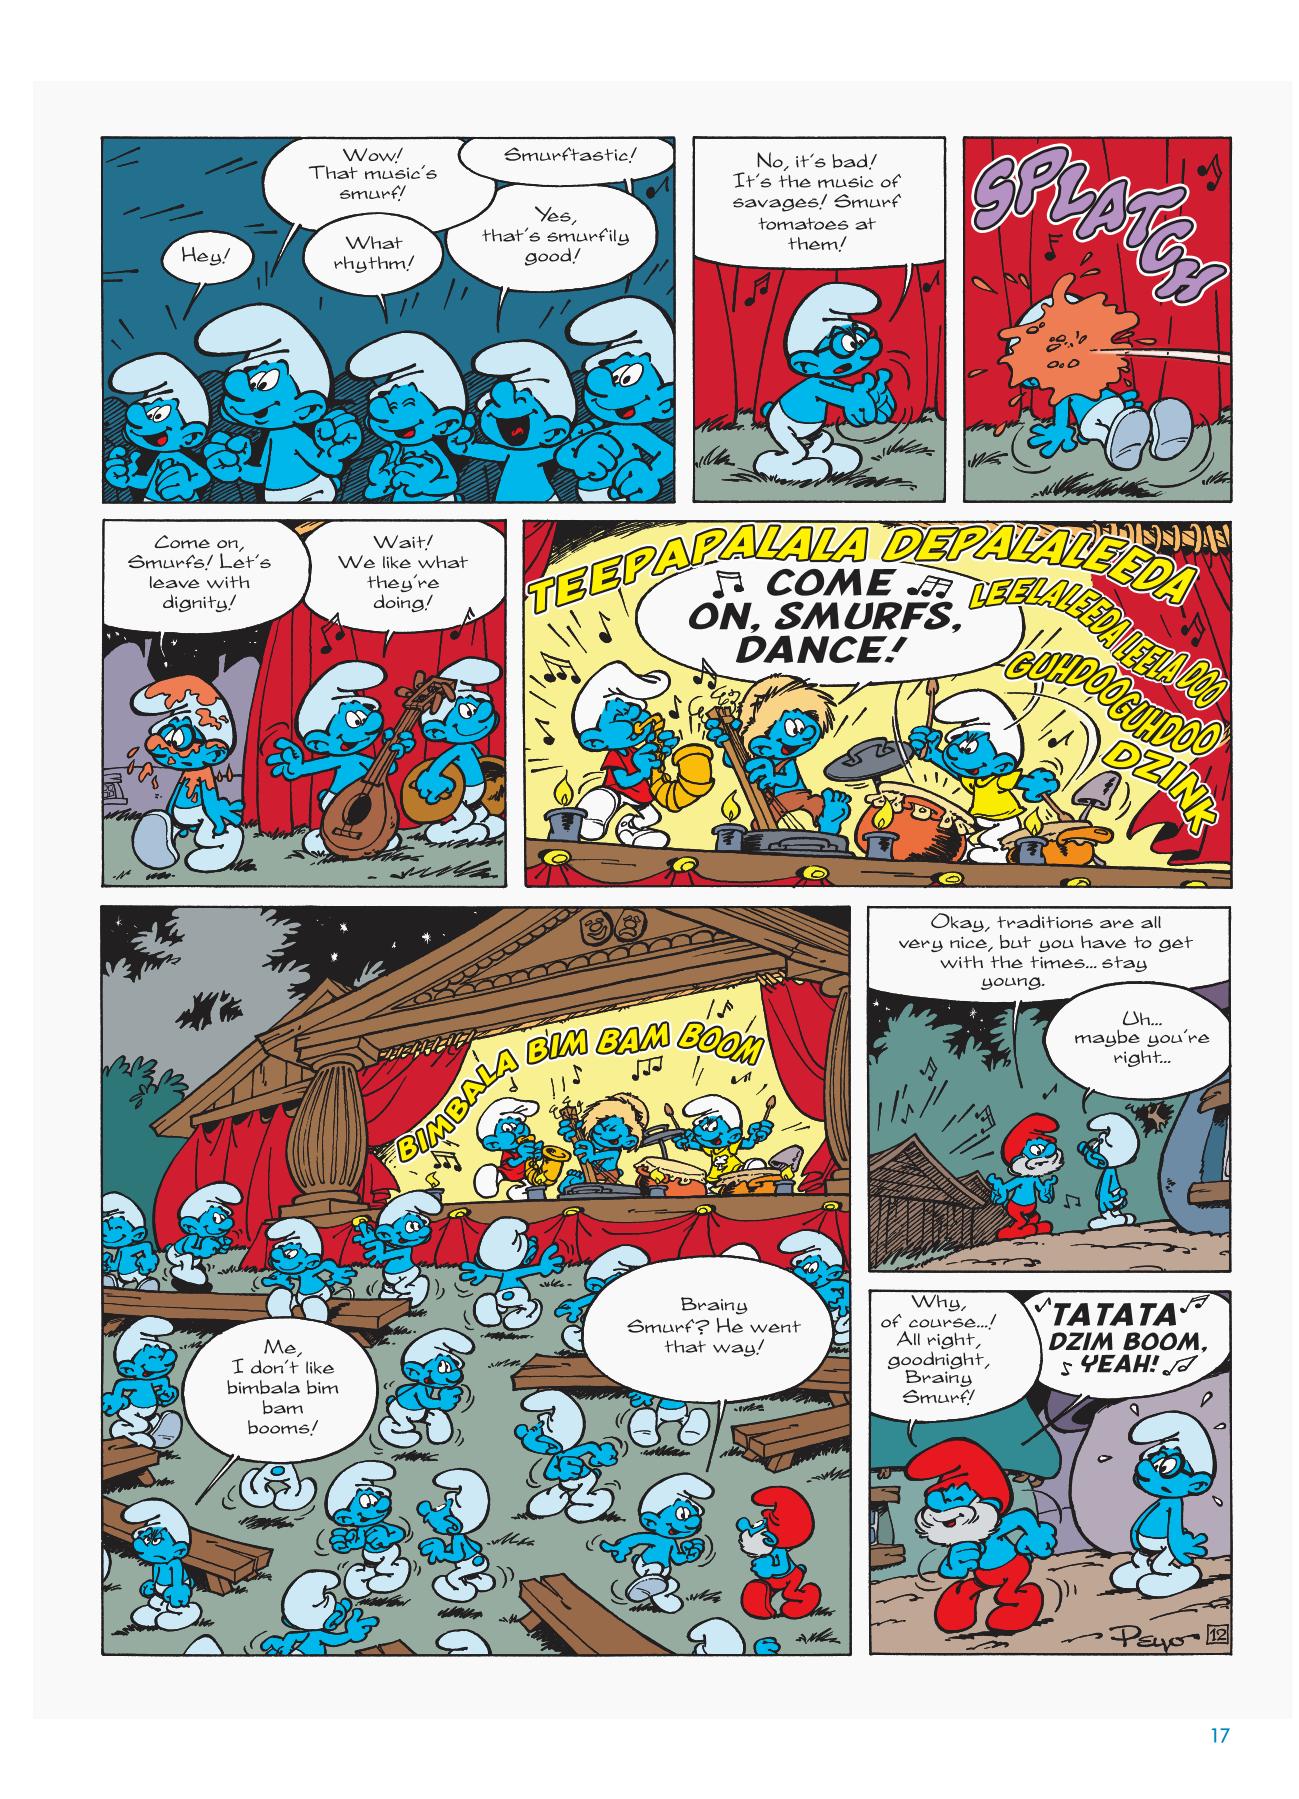 The Smurflings review